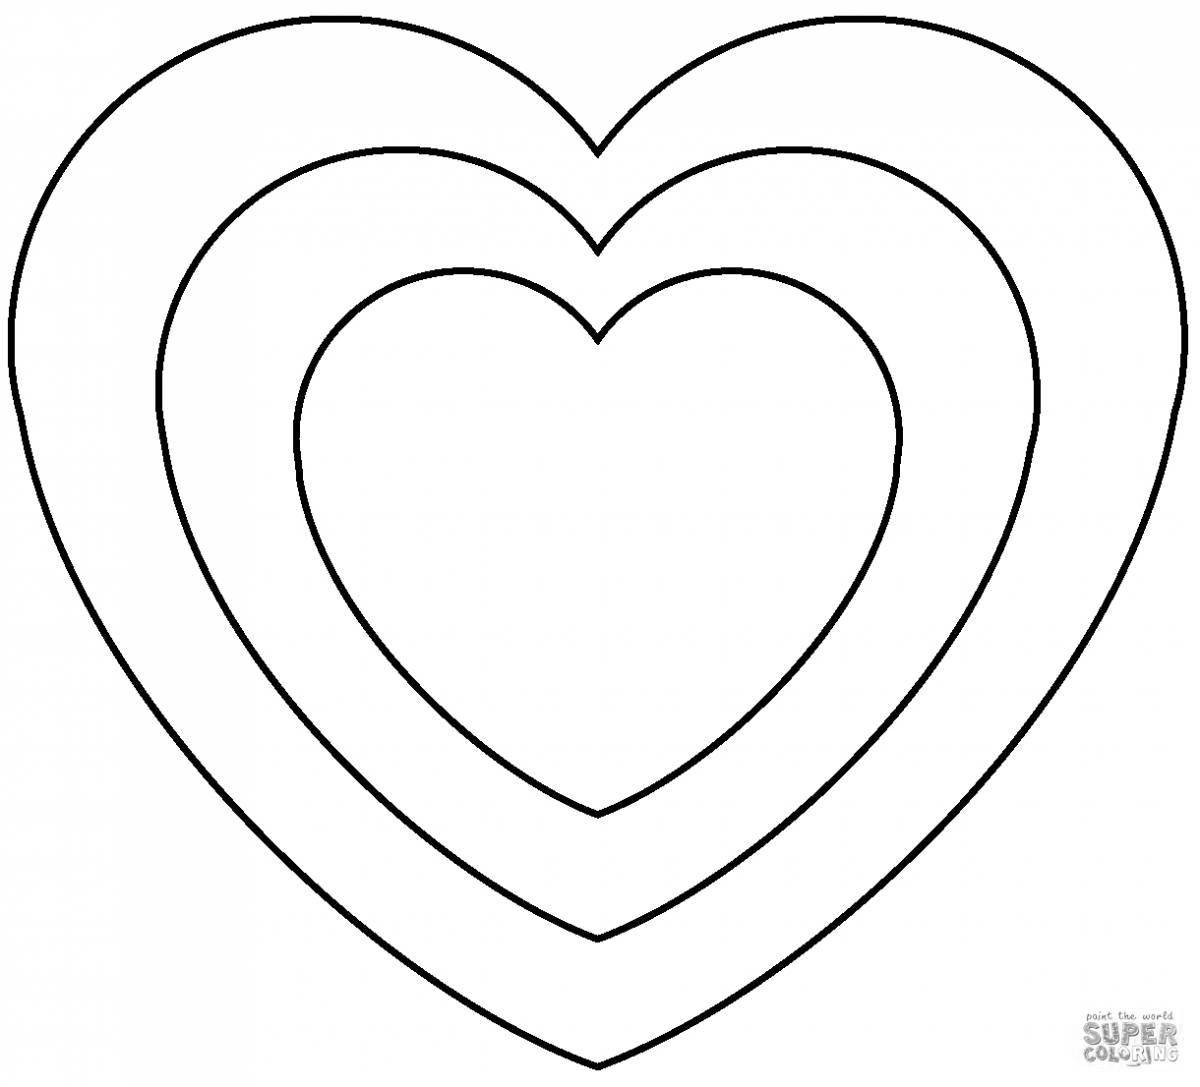 A fun heart coloring book for 3-4 year olds